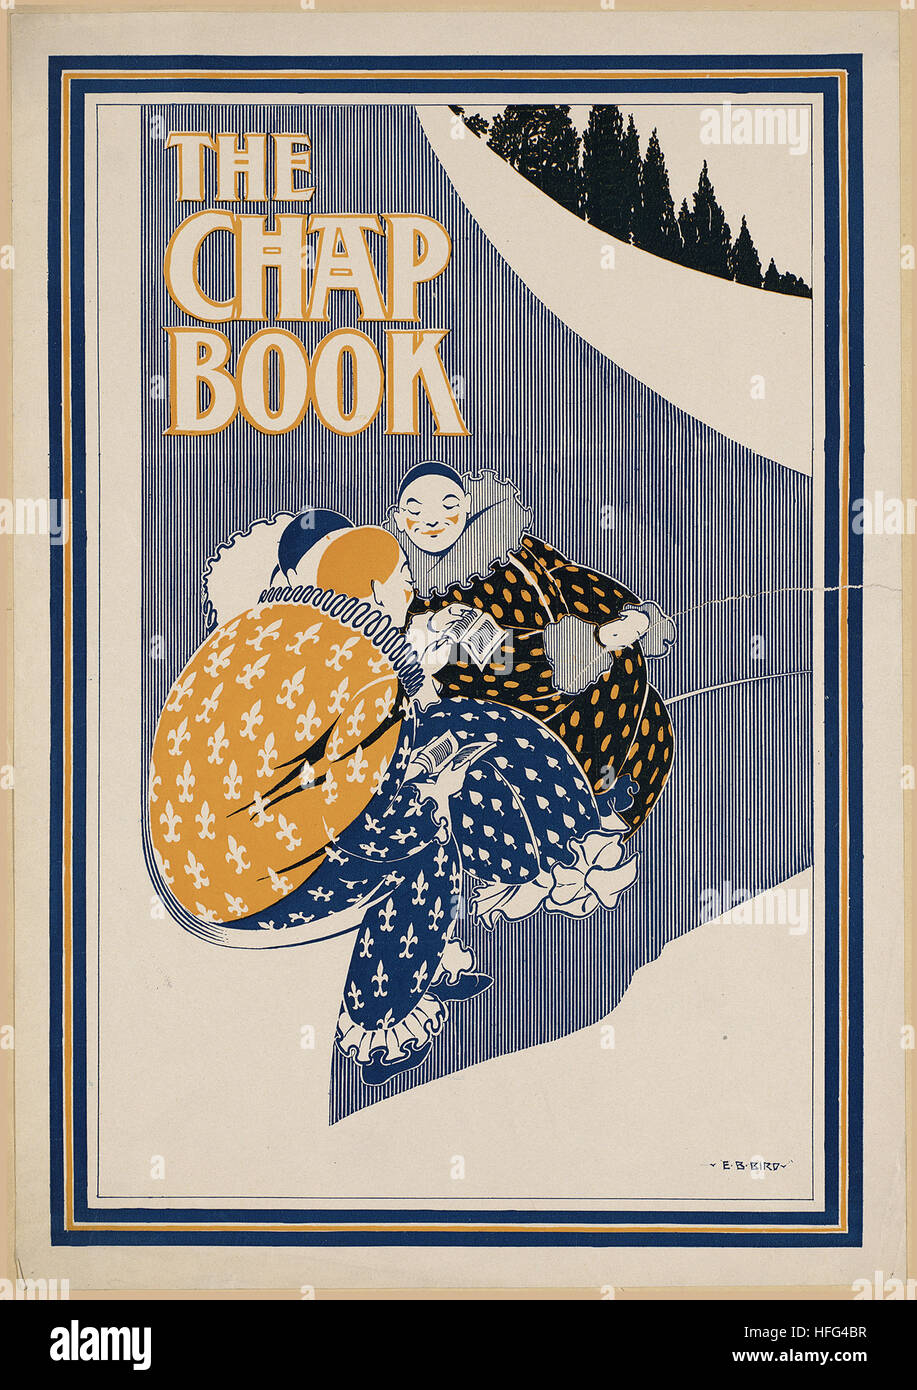 The chap book Stock Photo